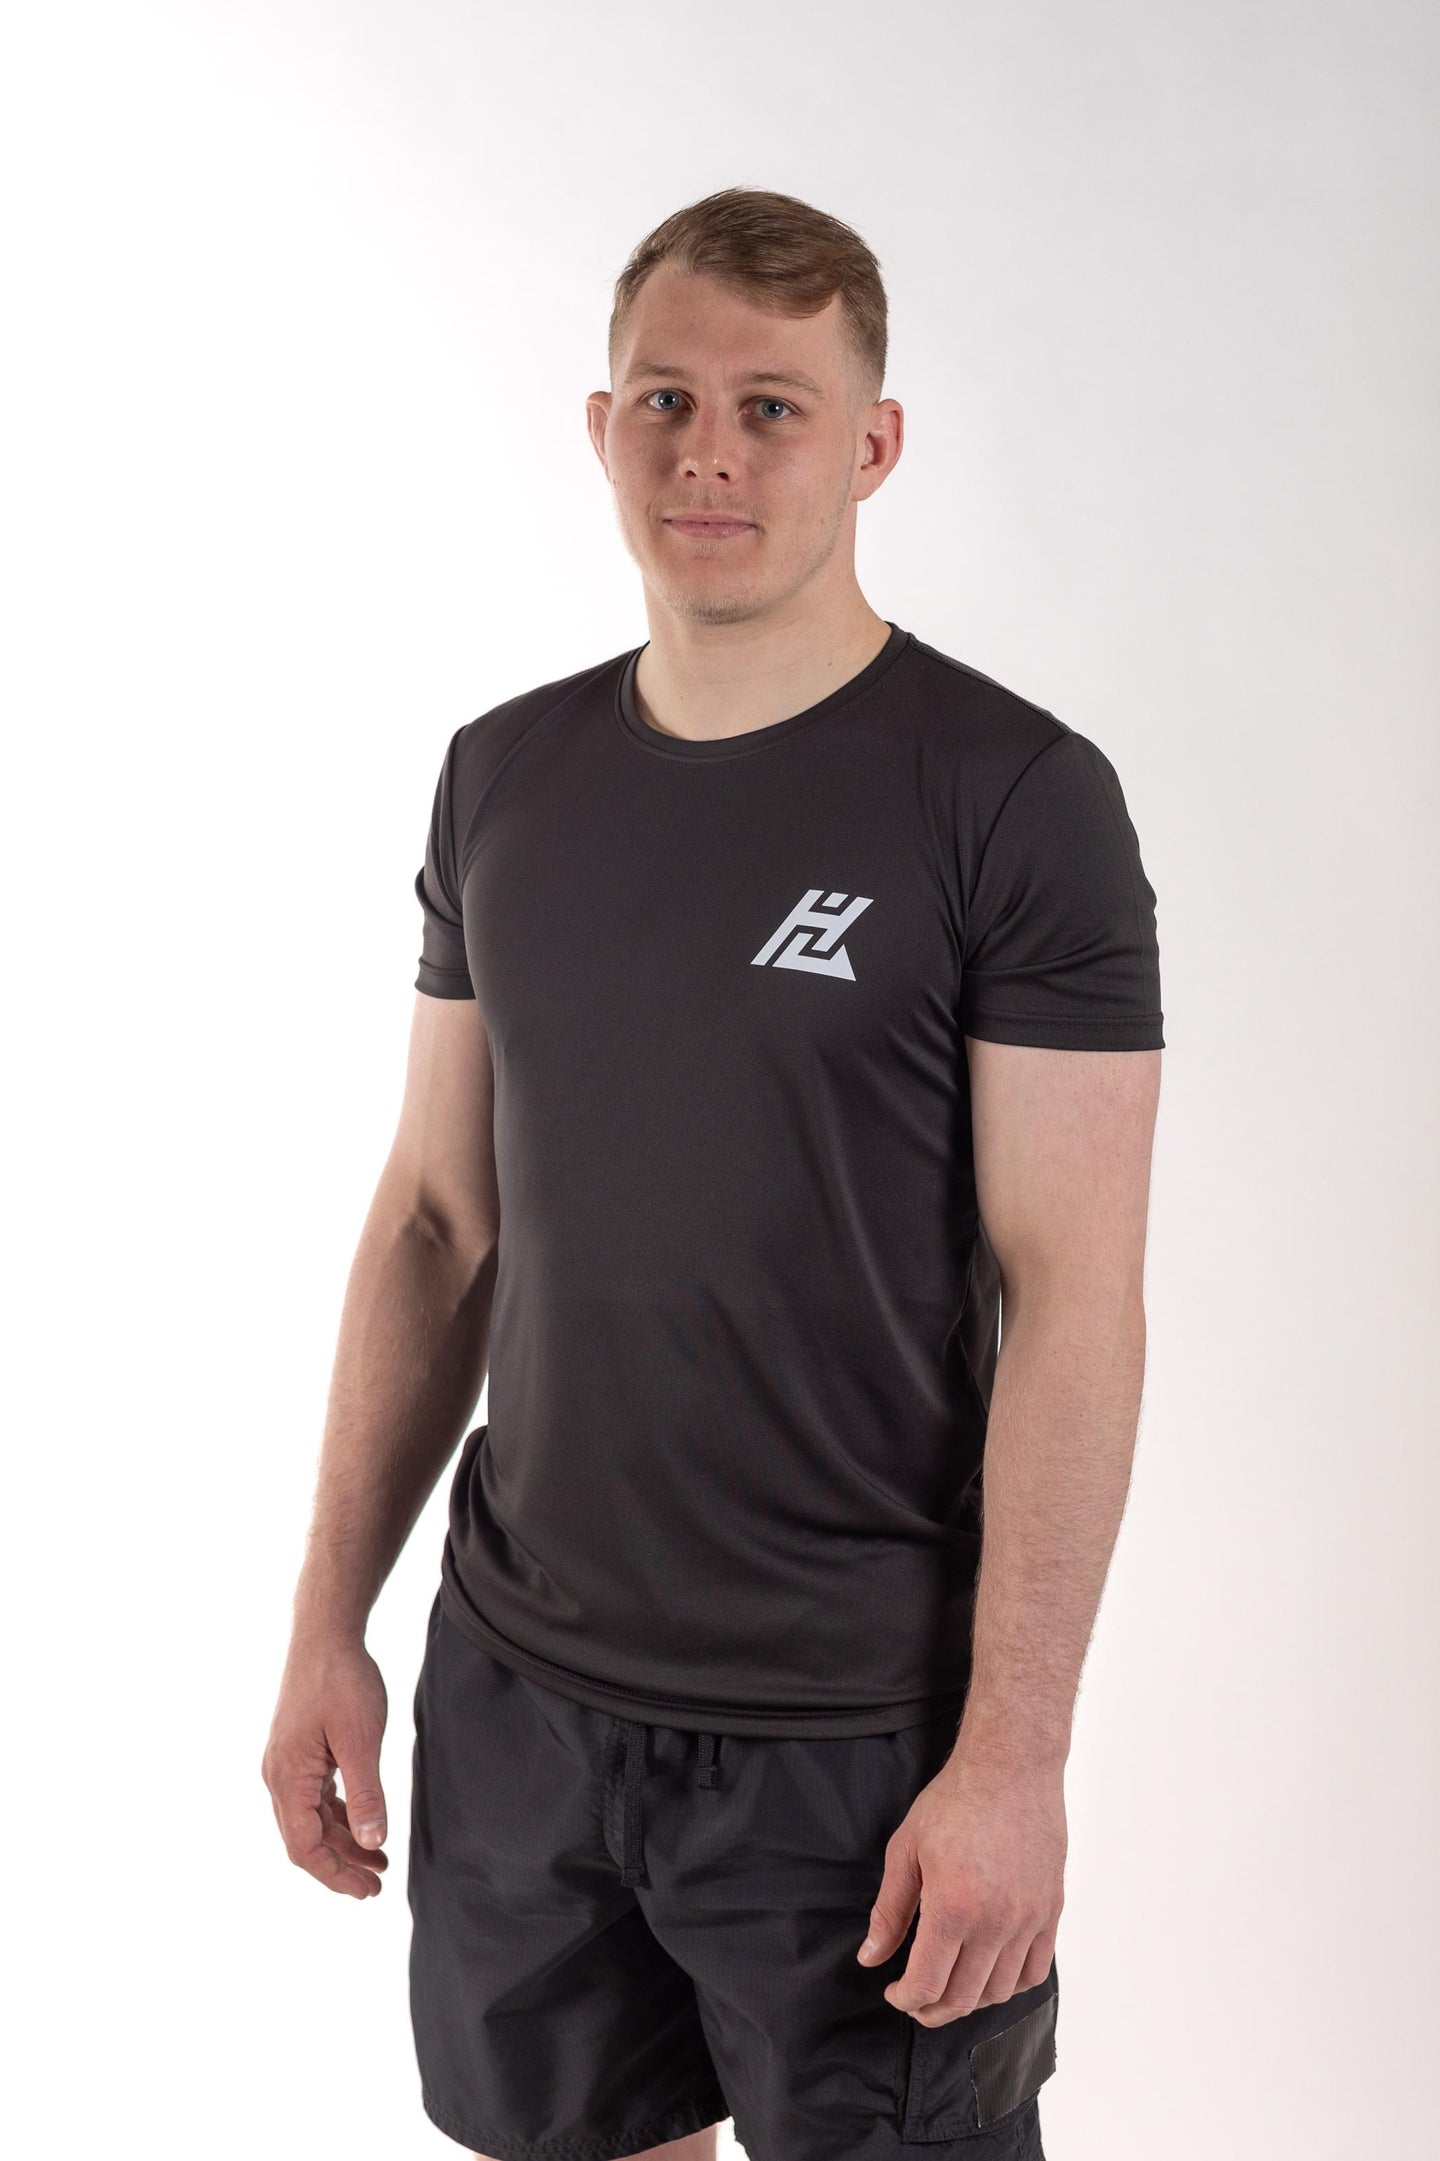 Image of Hardlife Active Training Tee - hardlife-active-training-tee: Push your limits with the Men's Hardlife Active Training Tee, engineered for peak performance and ultimate comfort